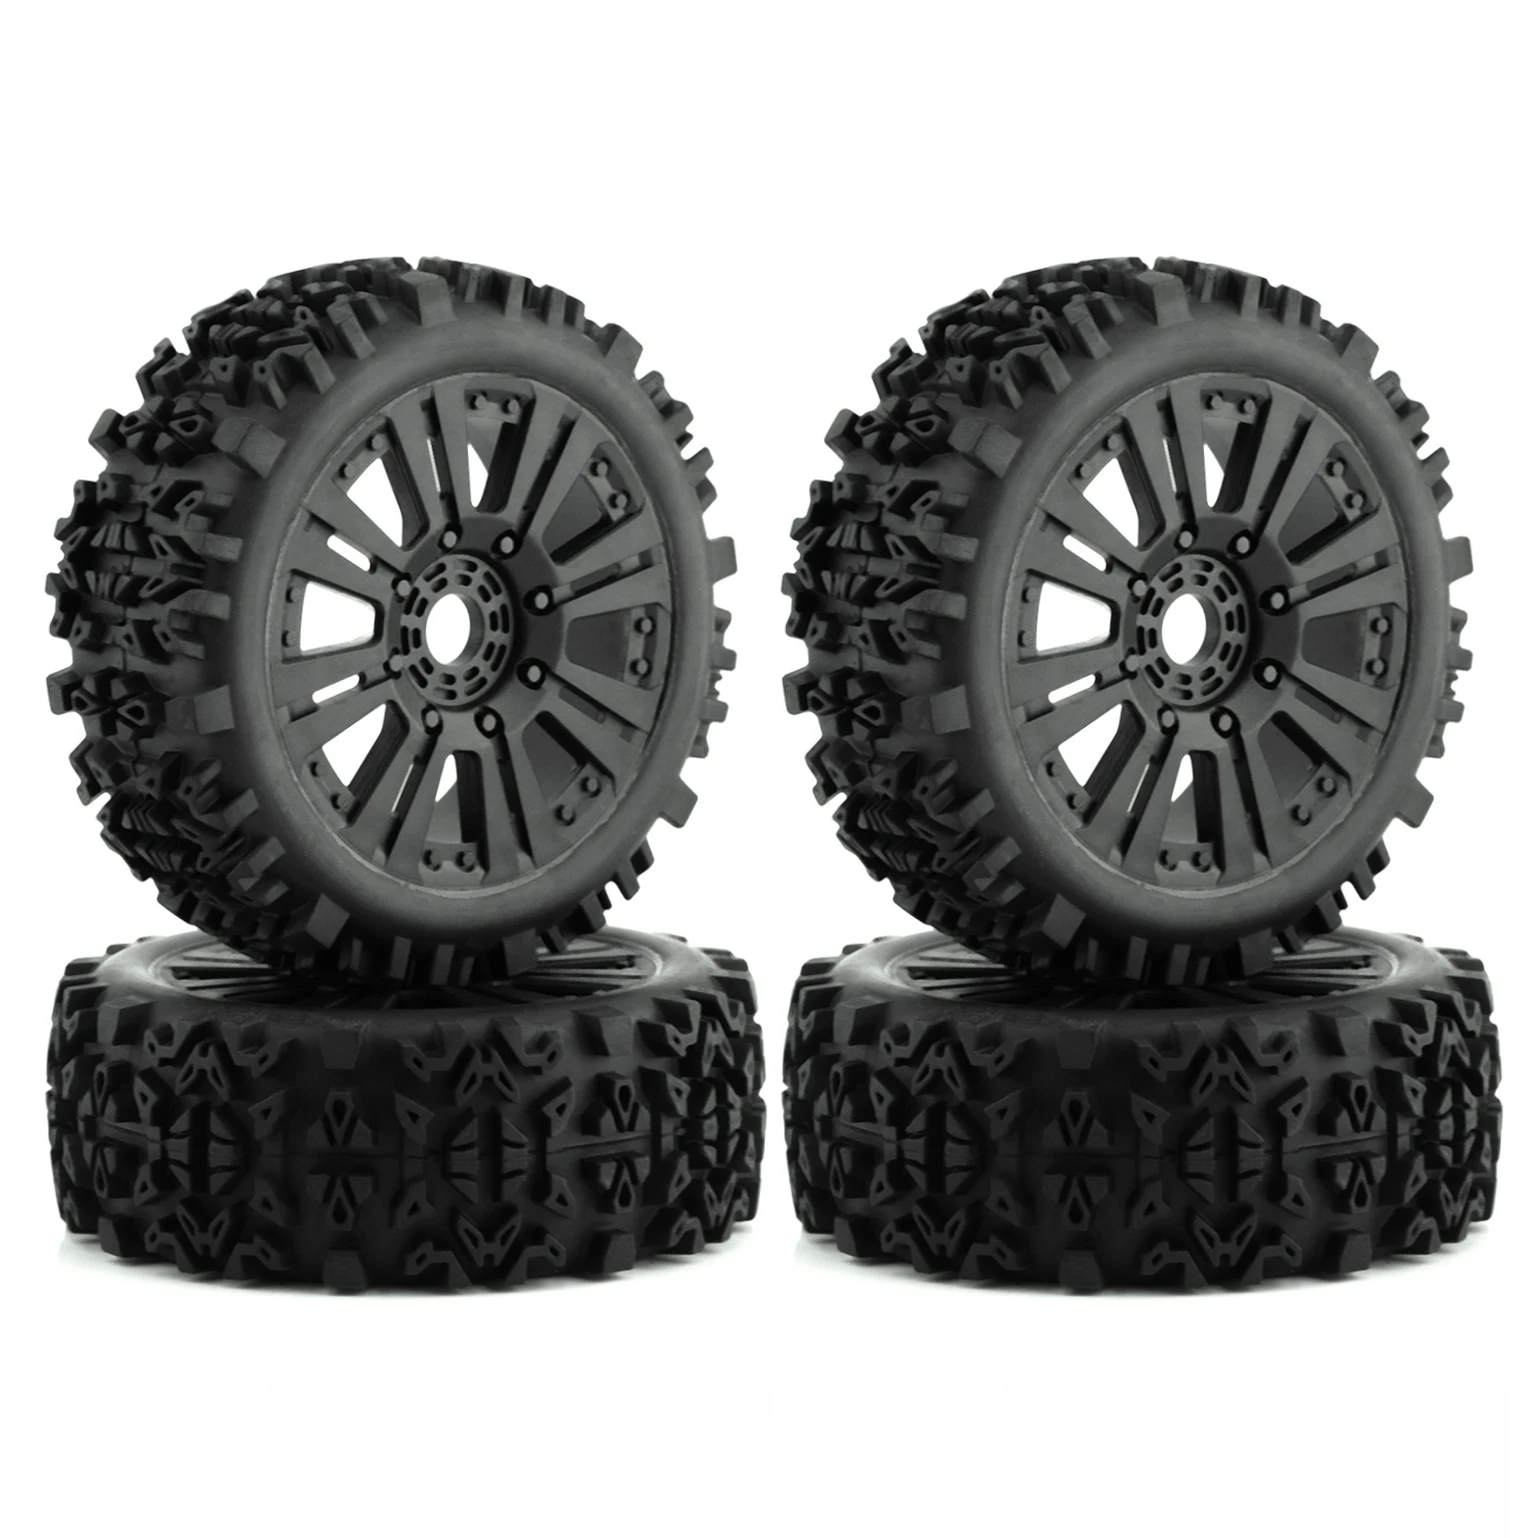 

4pcs 120mm 1/8 RC Off-Road Buggy Wheels Tire 17mm Hex for ARRMA Typhon Talion Traxxas Redcat Team Losi Kyosho HPI HSP VRX RC Car